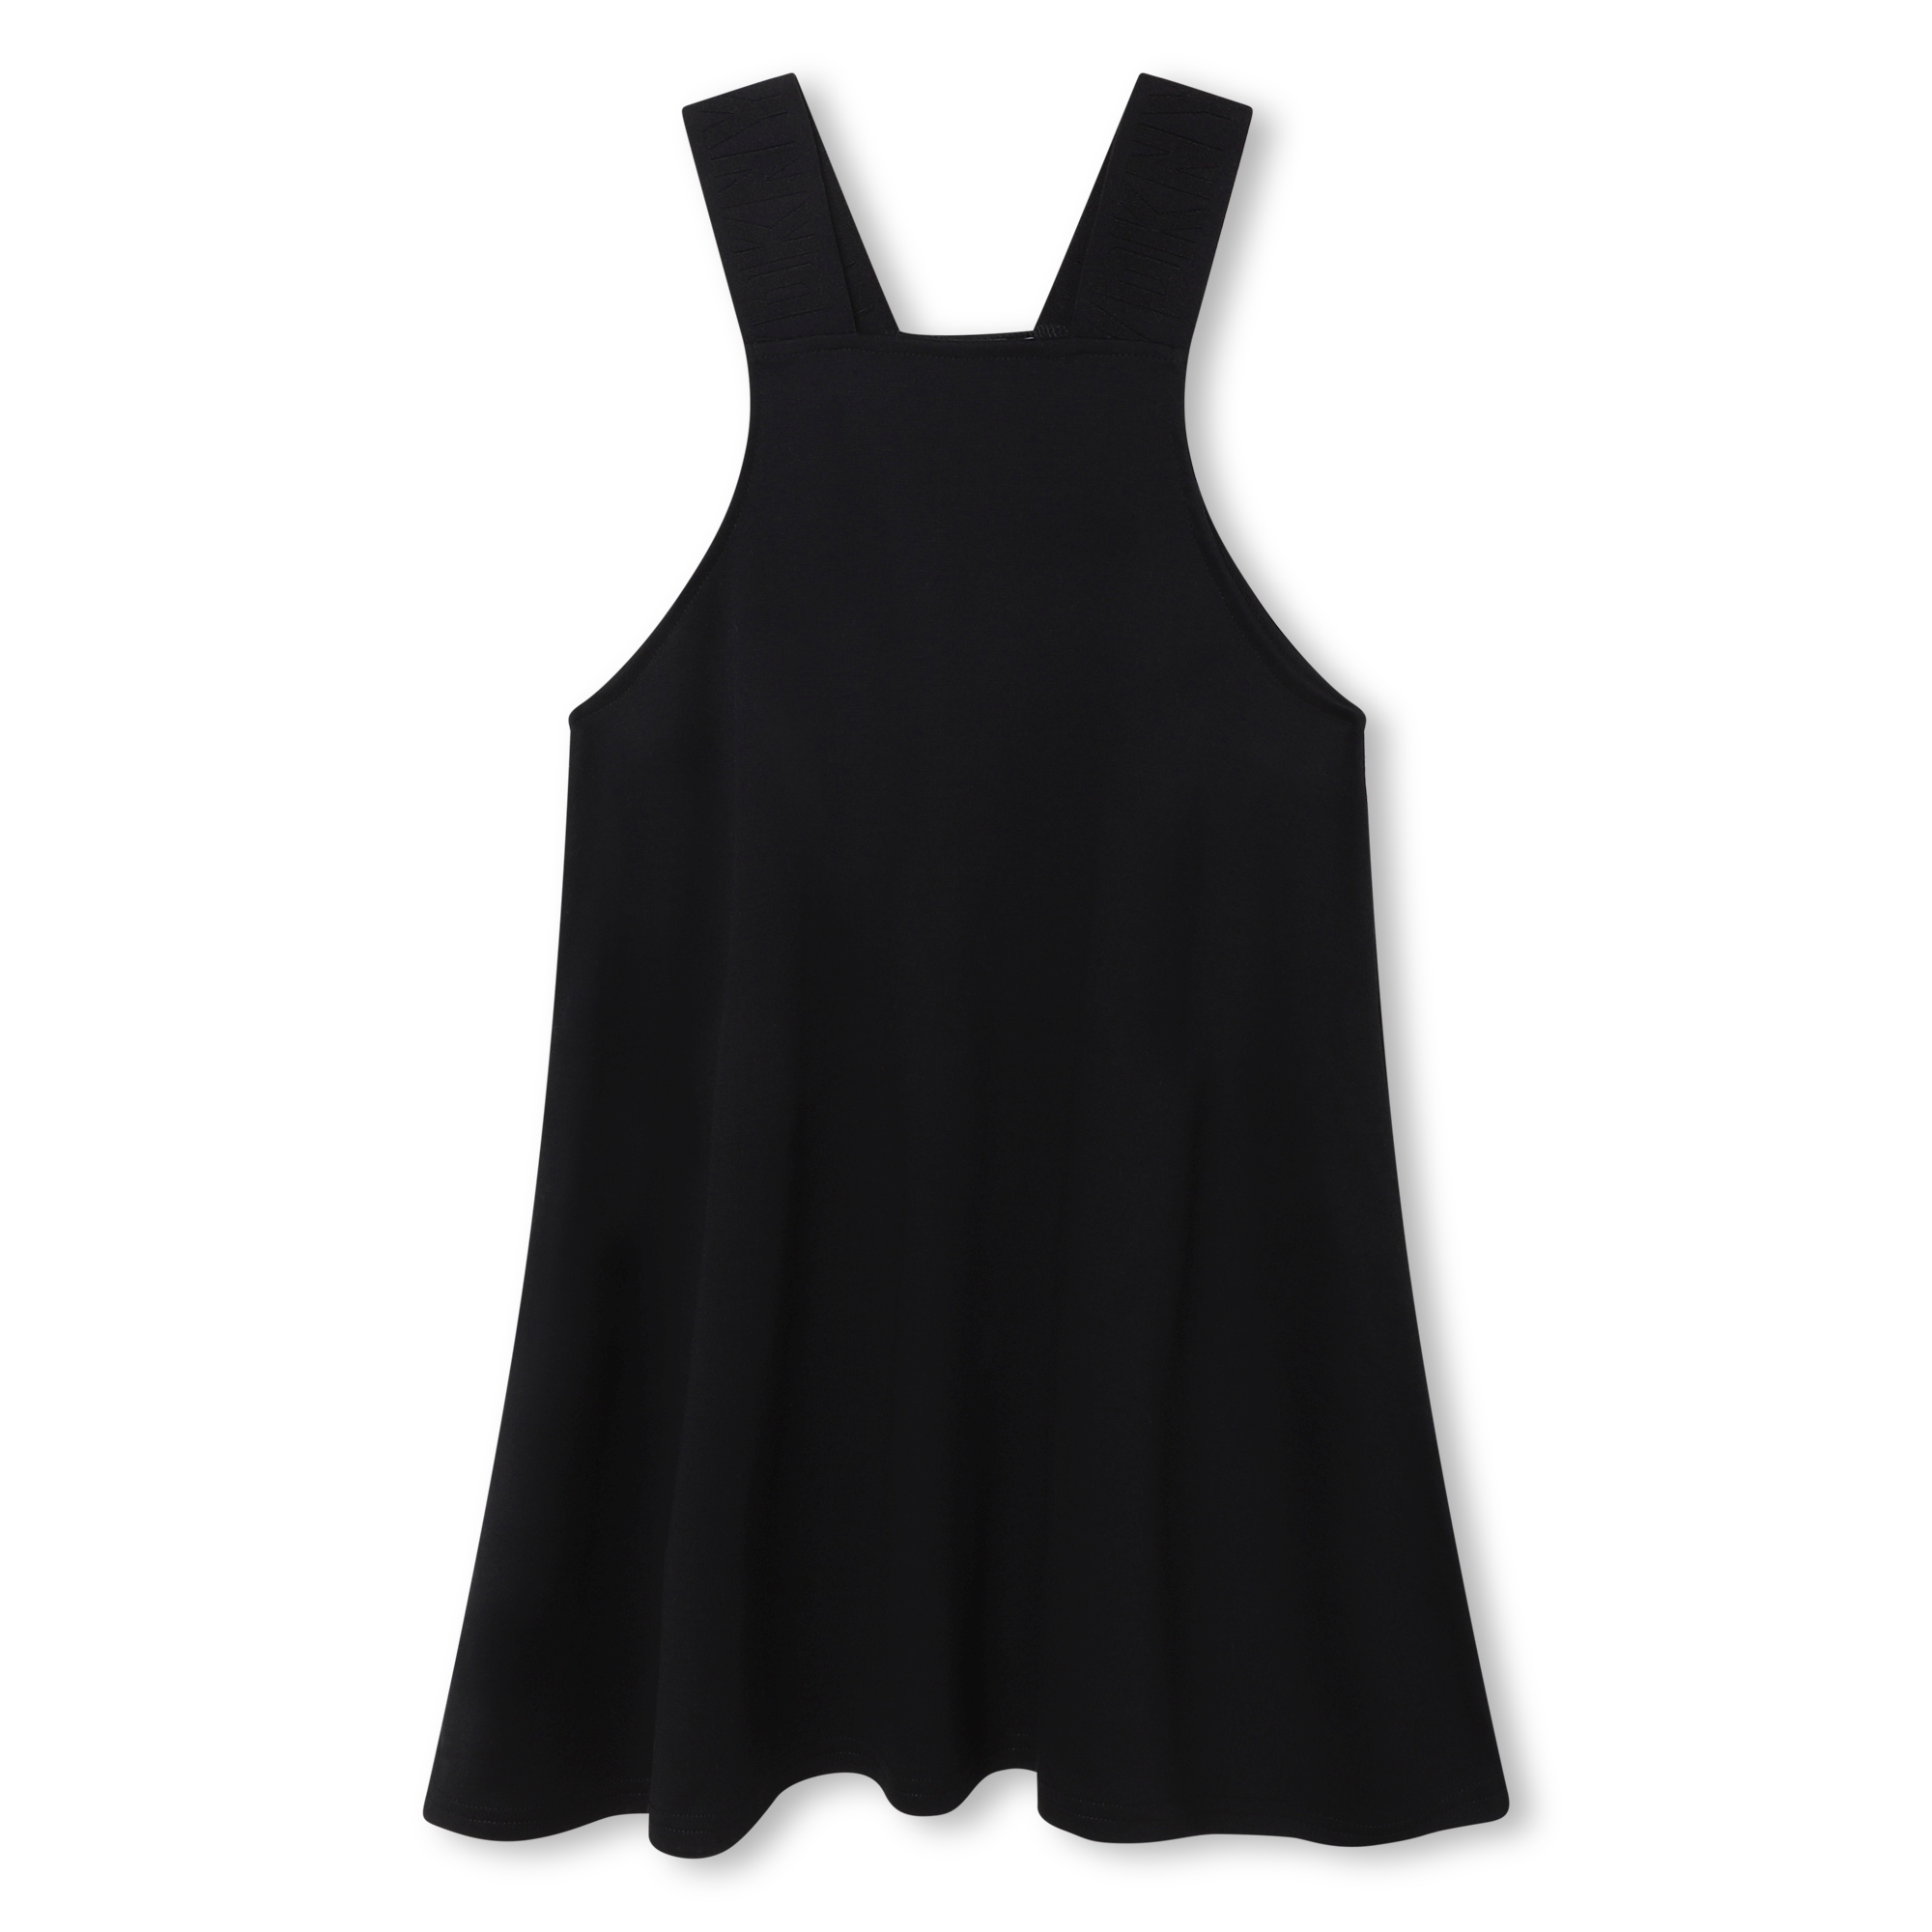 2-in-1 dress with sweatshirt DKNY for GIRL